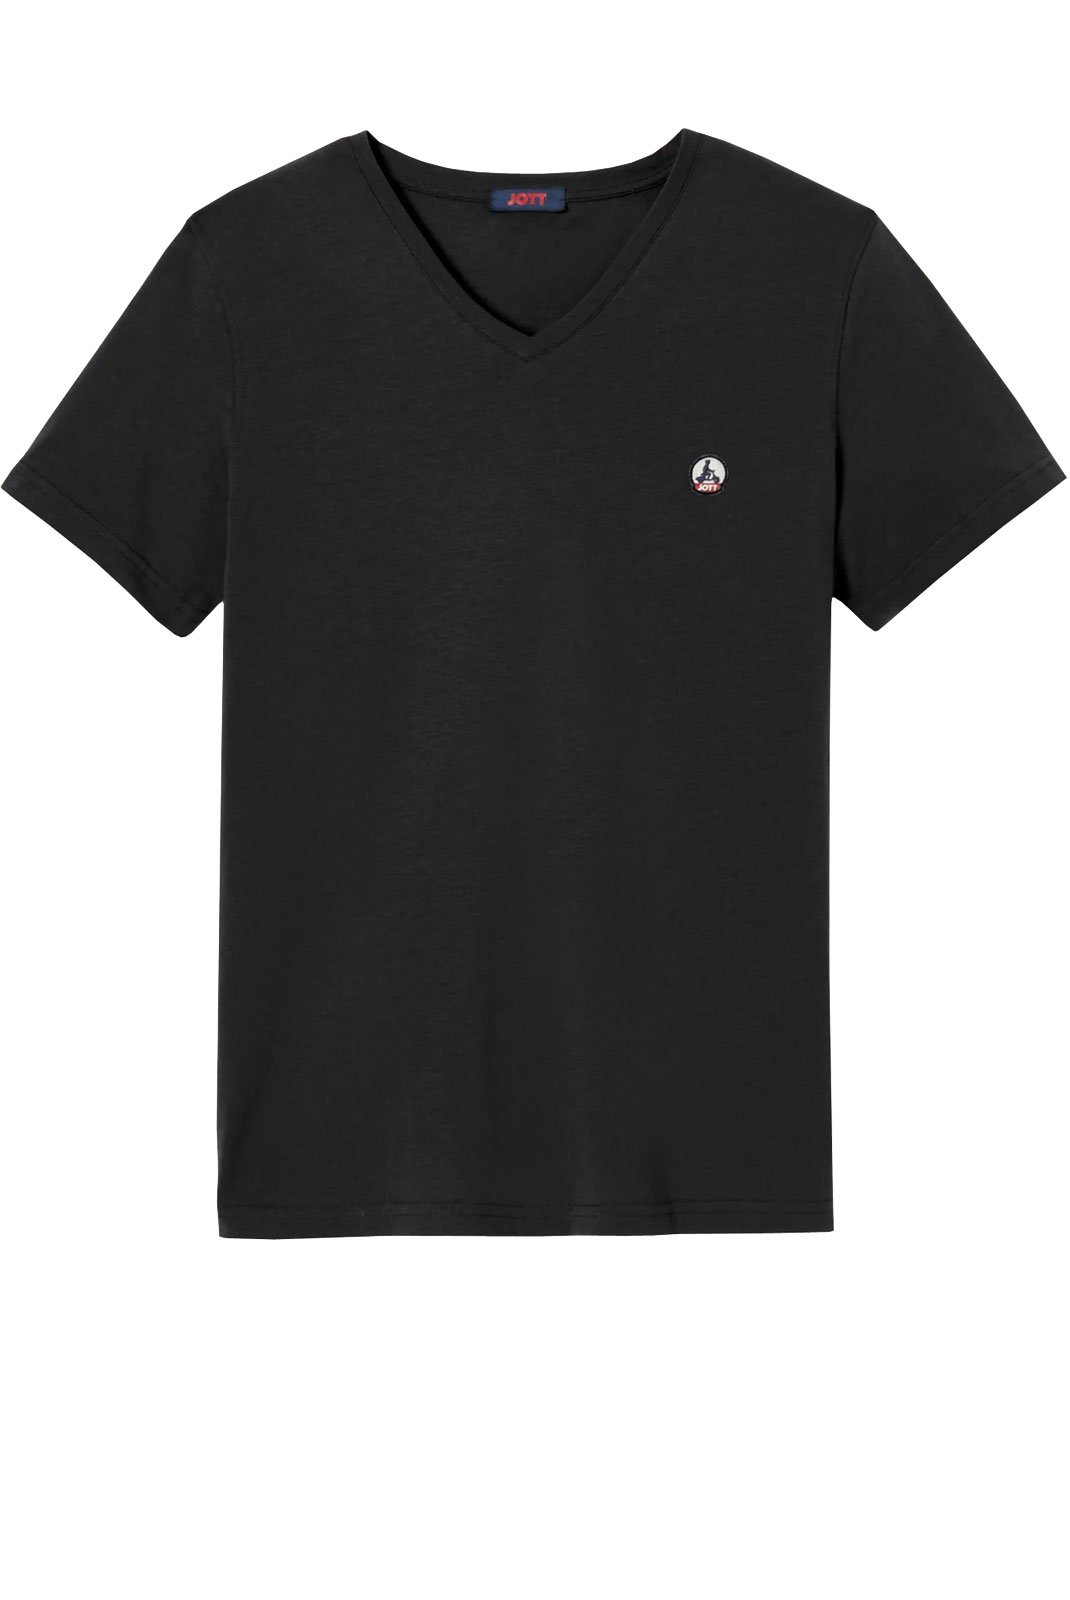 Tee-shirts  Just over the top BENITO 999 BLACK